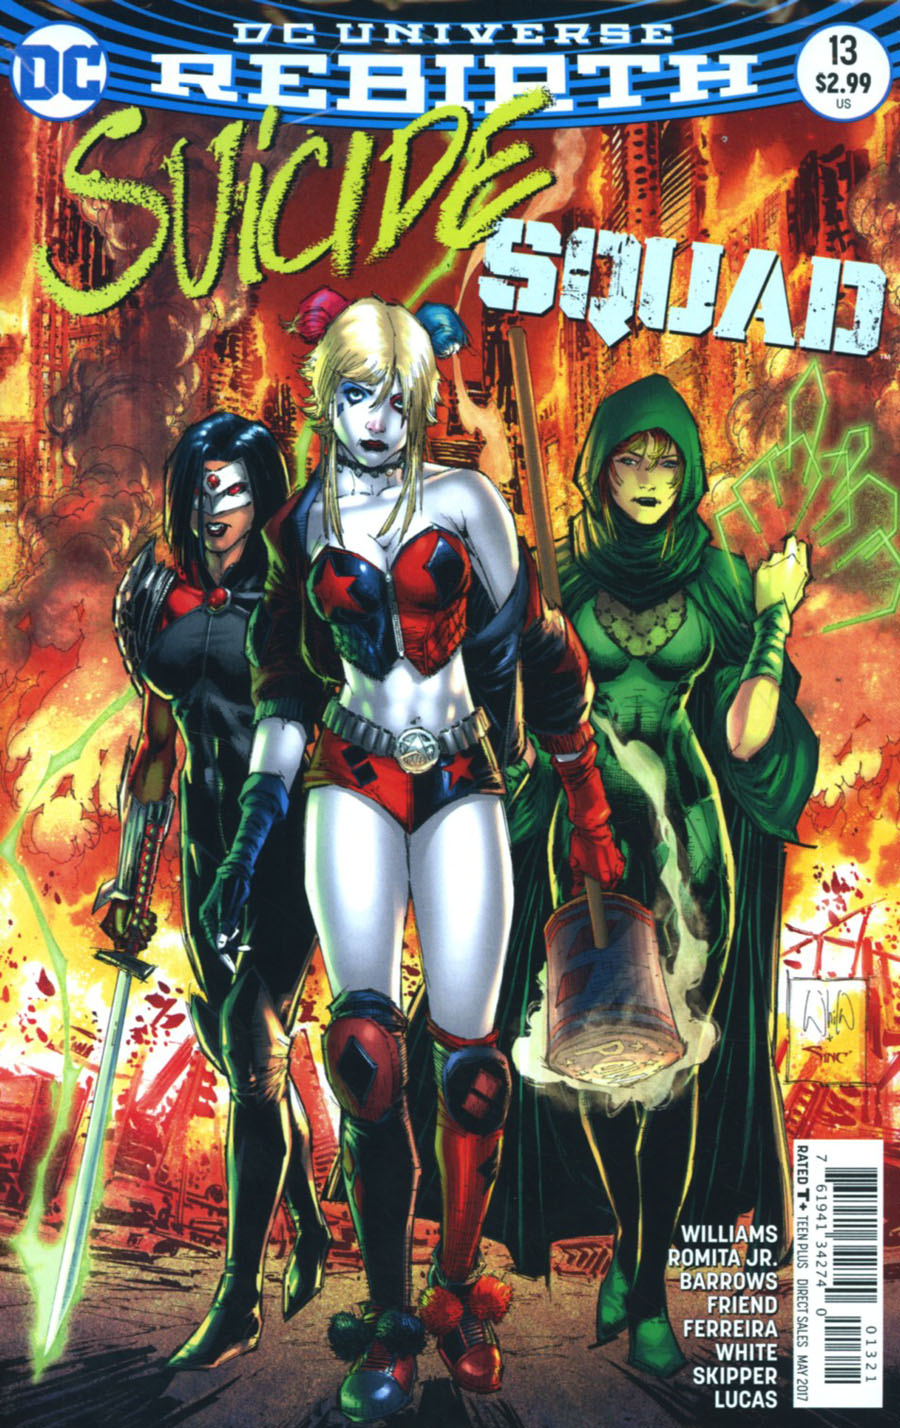 Suicide Squad Vol 4 #13 Cover B Variant Whilce Portacio Cover With Polybag